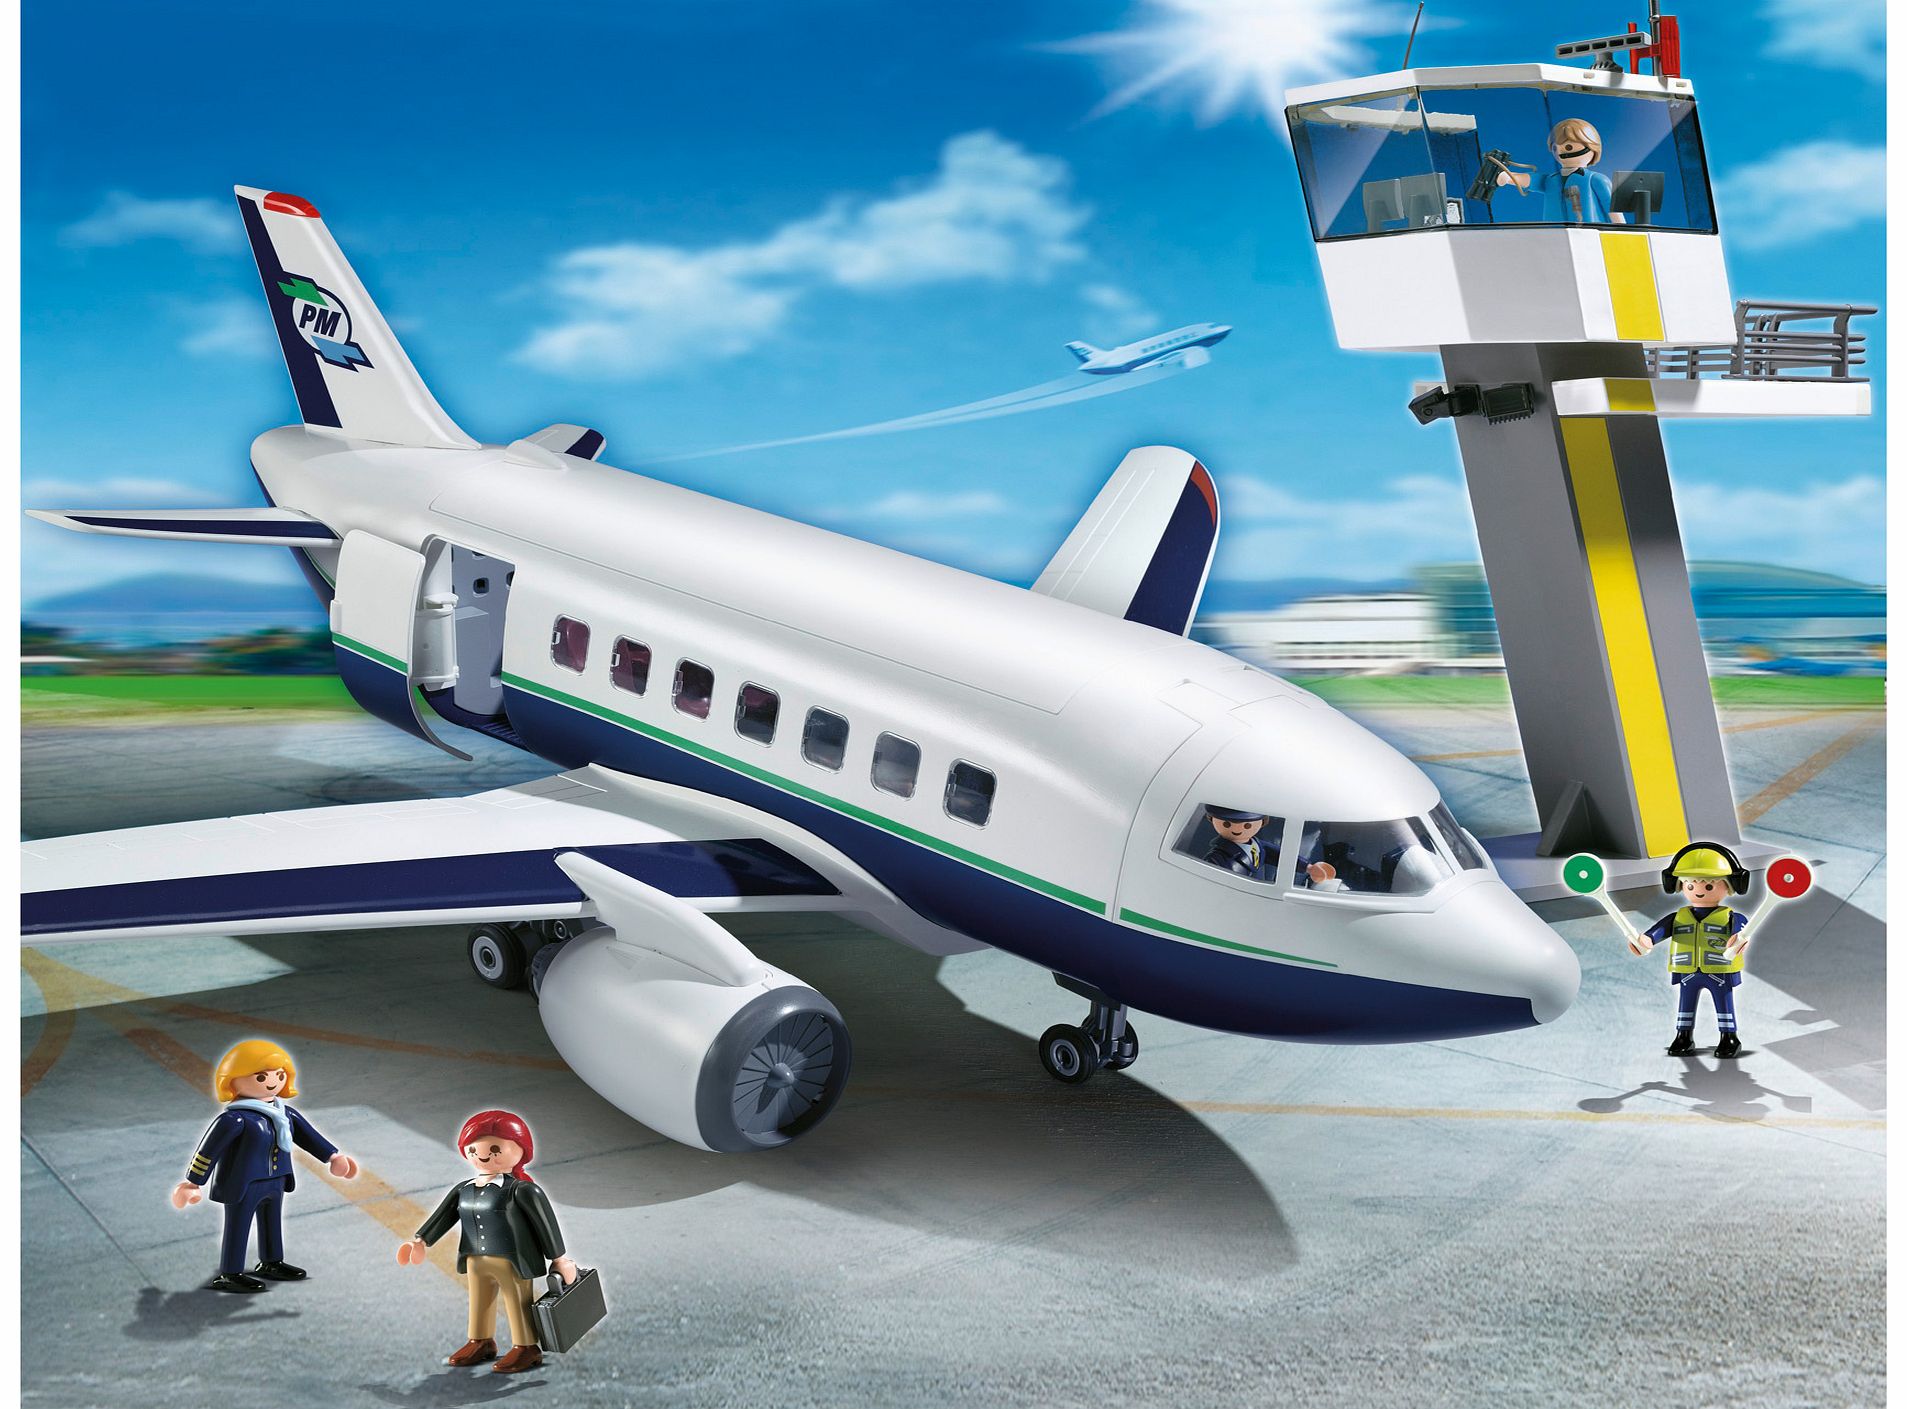 PLAYMOBIL Airplane With Tower 5261